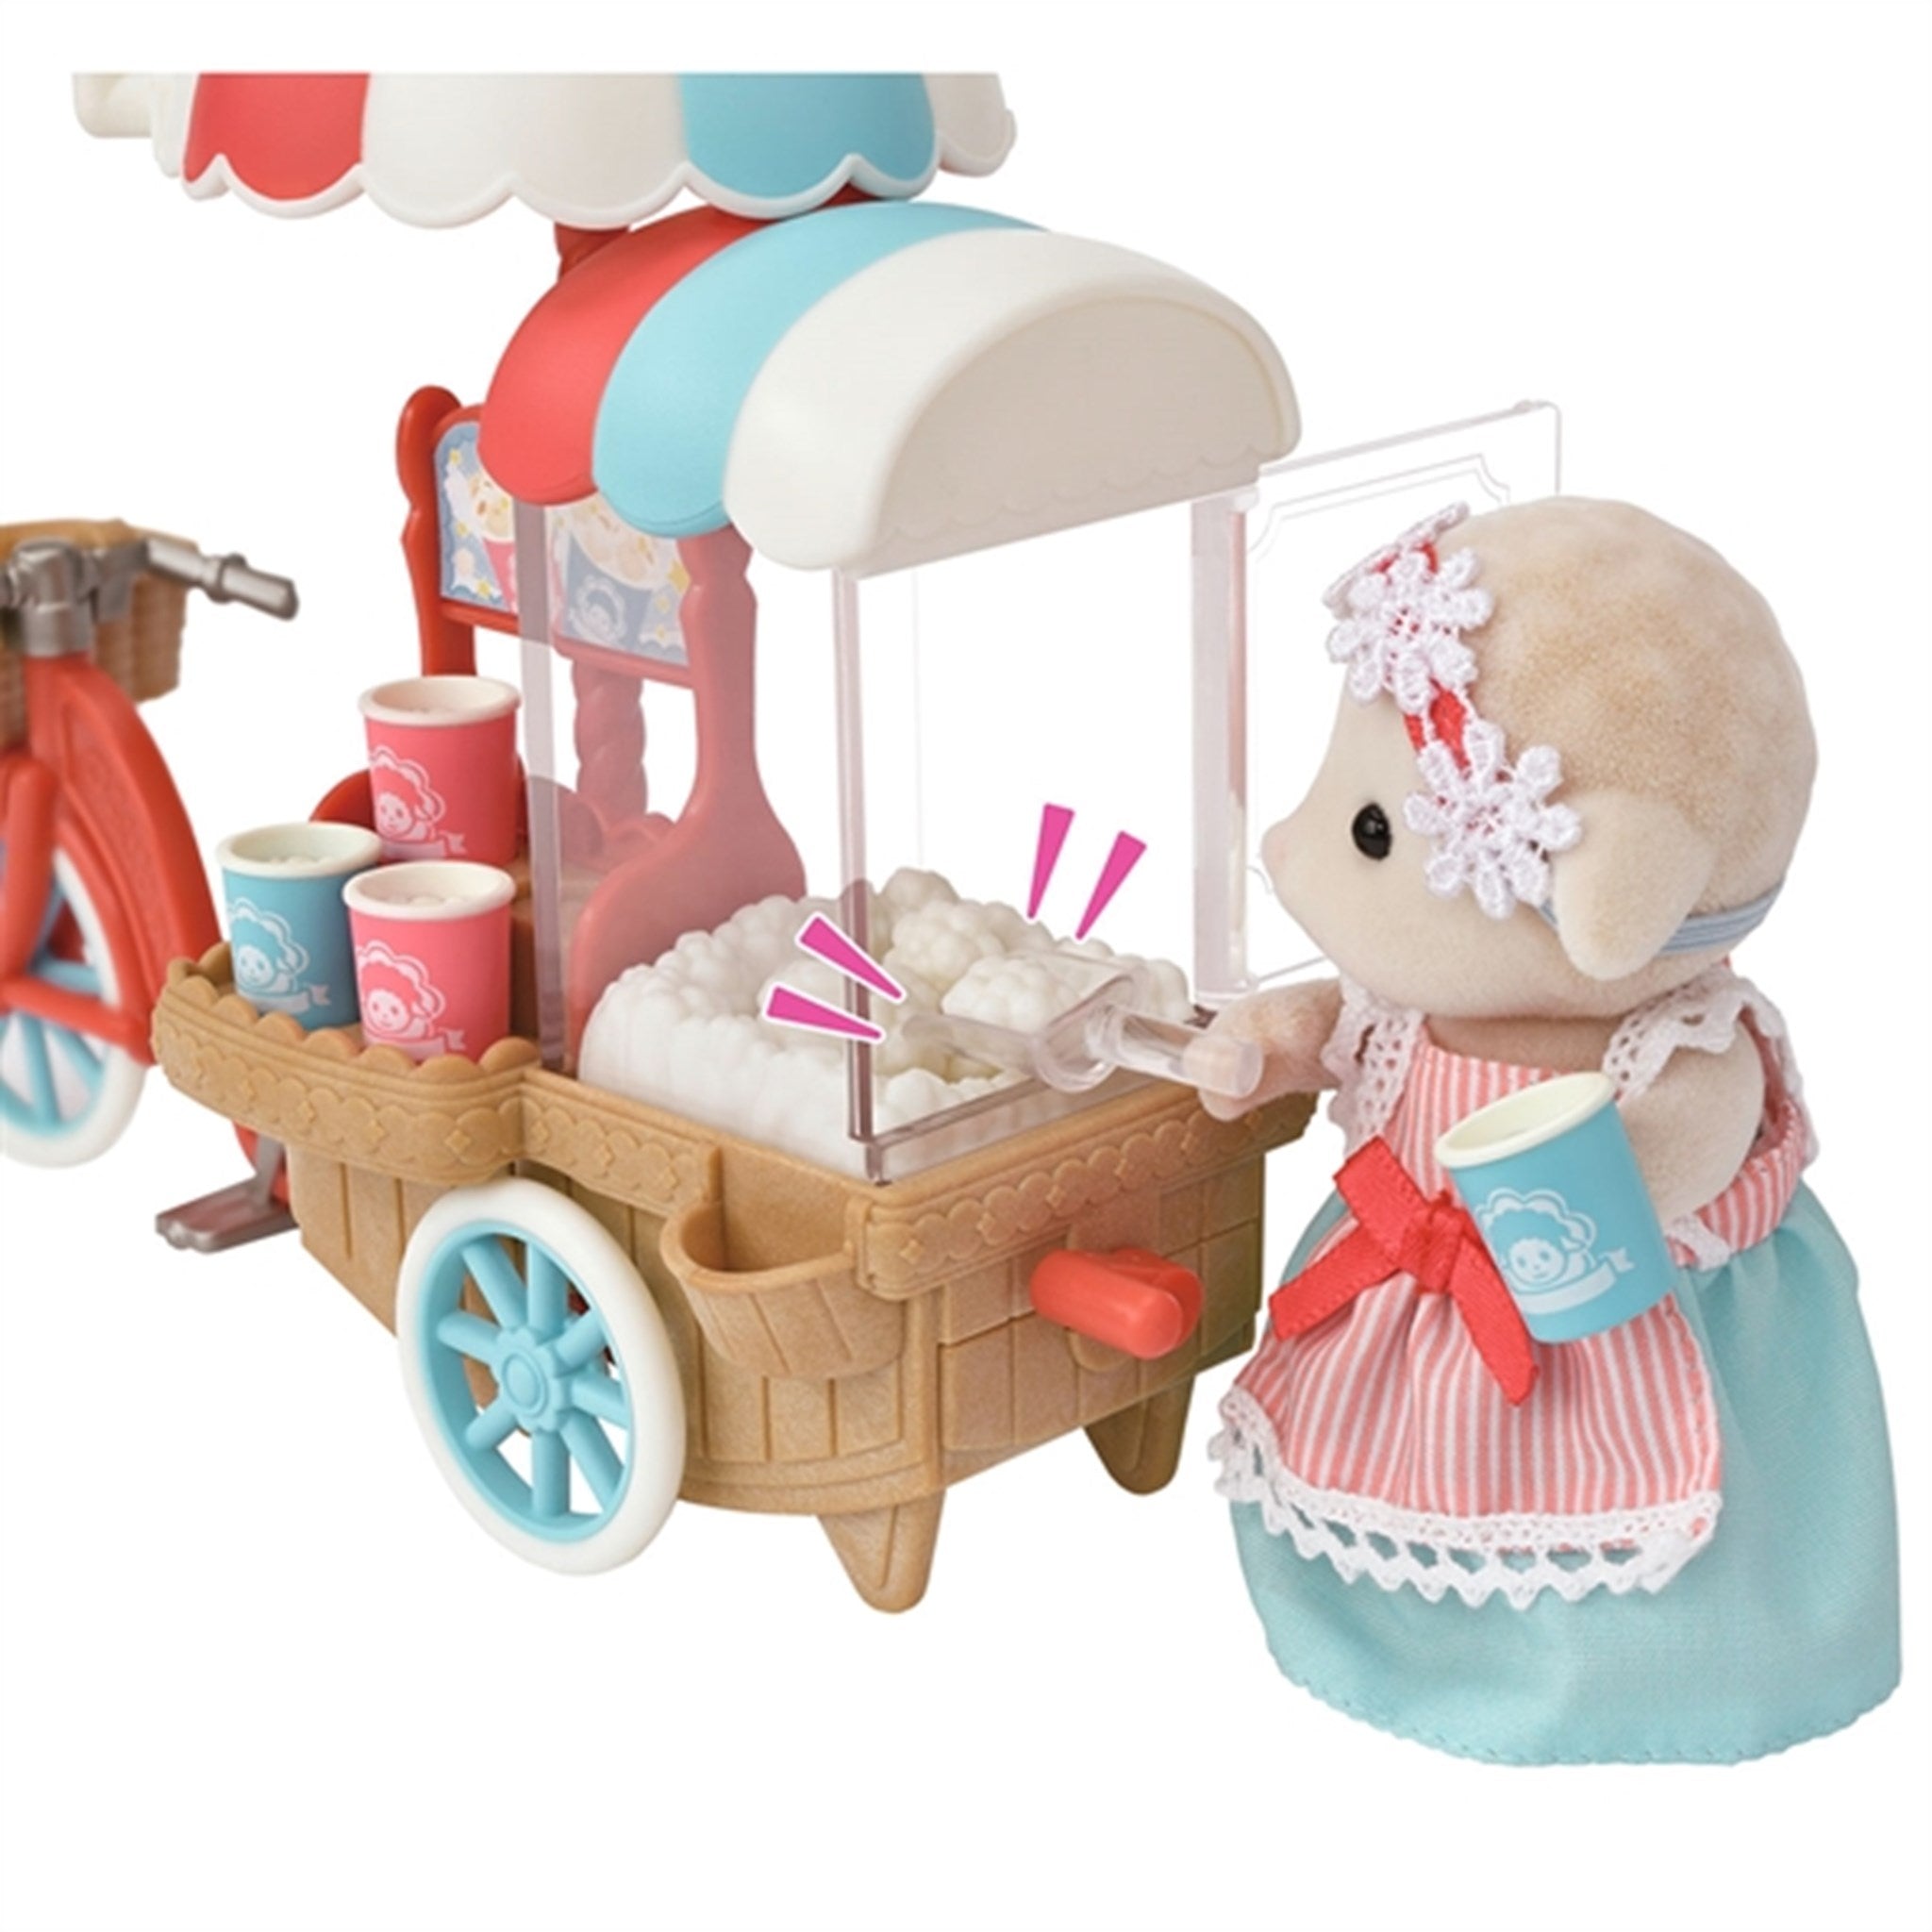 Sylvanian Families Popcorn Delivery Service With Figur 4